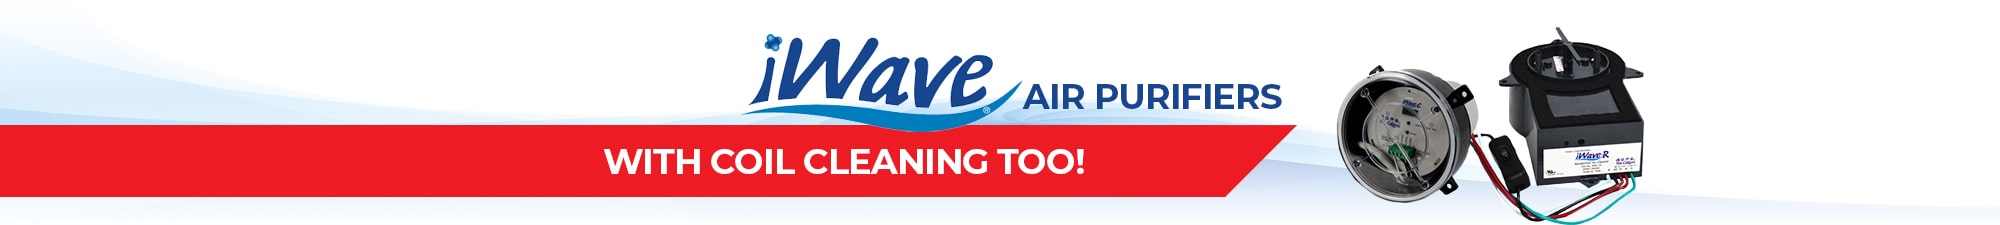 Live in Nashville TN? Get your iWave air purifier units serviced  by Copeland & Son Services